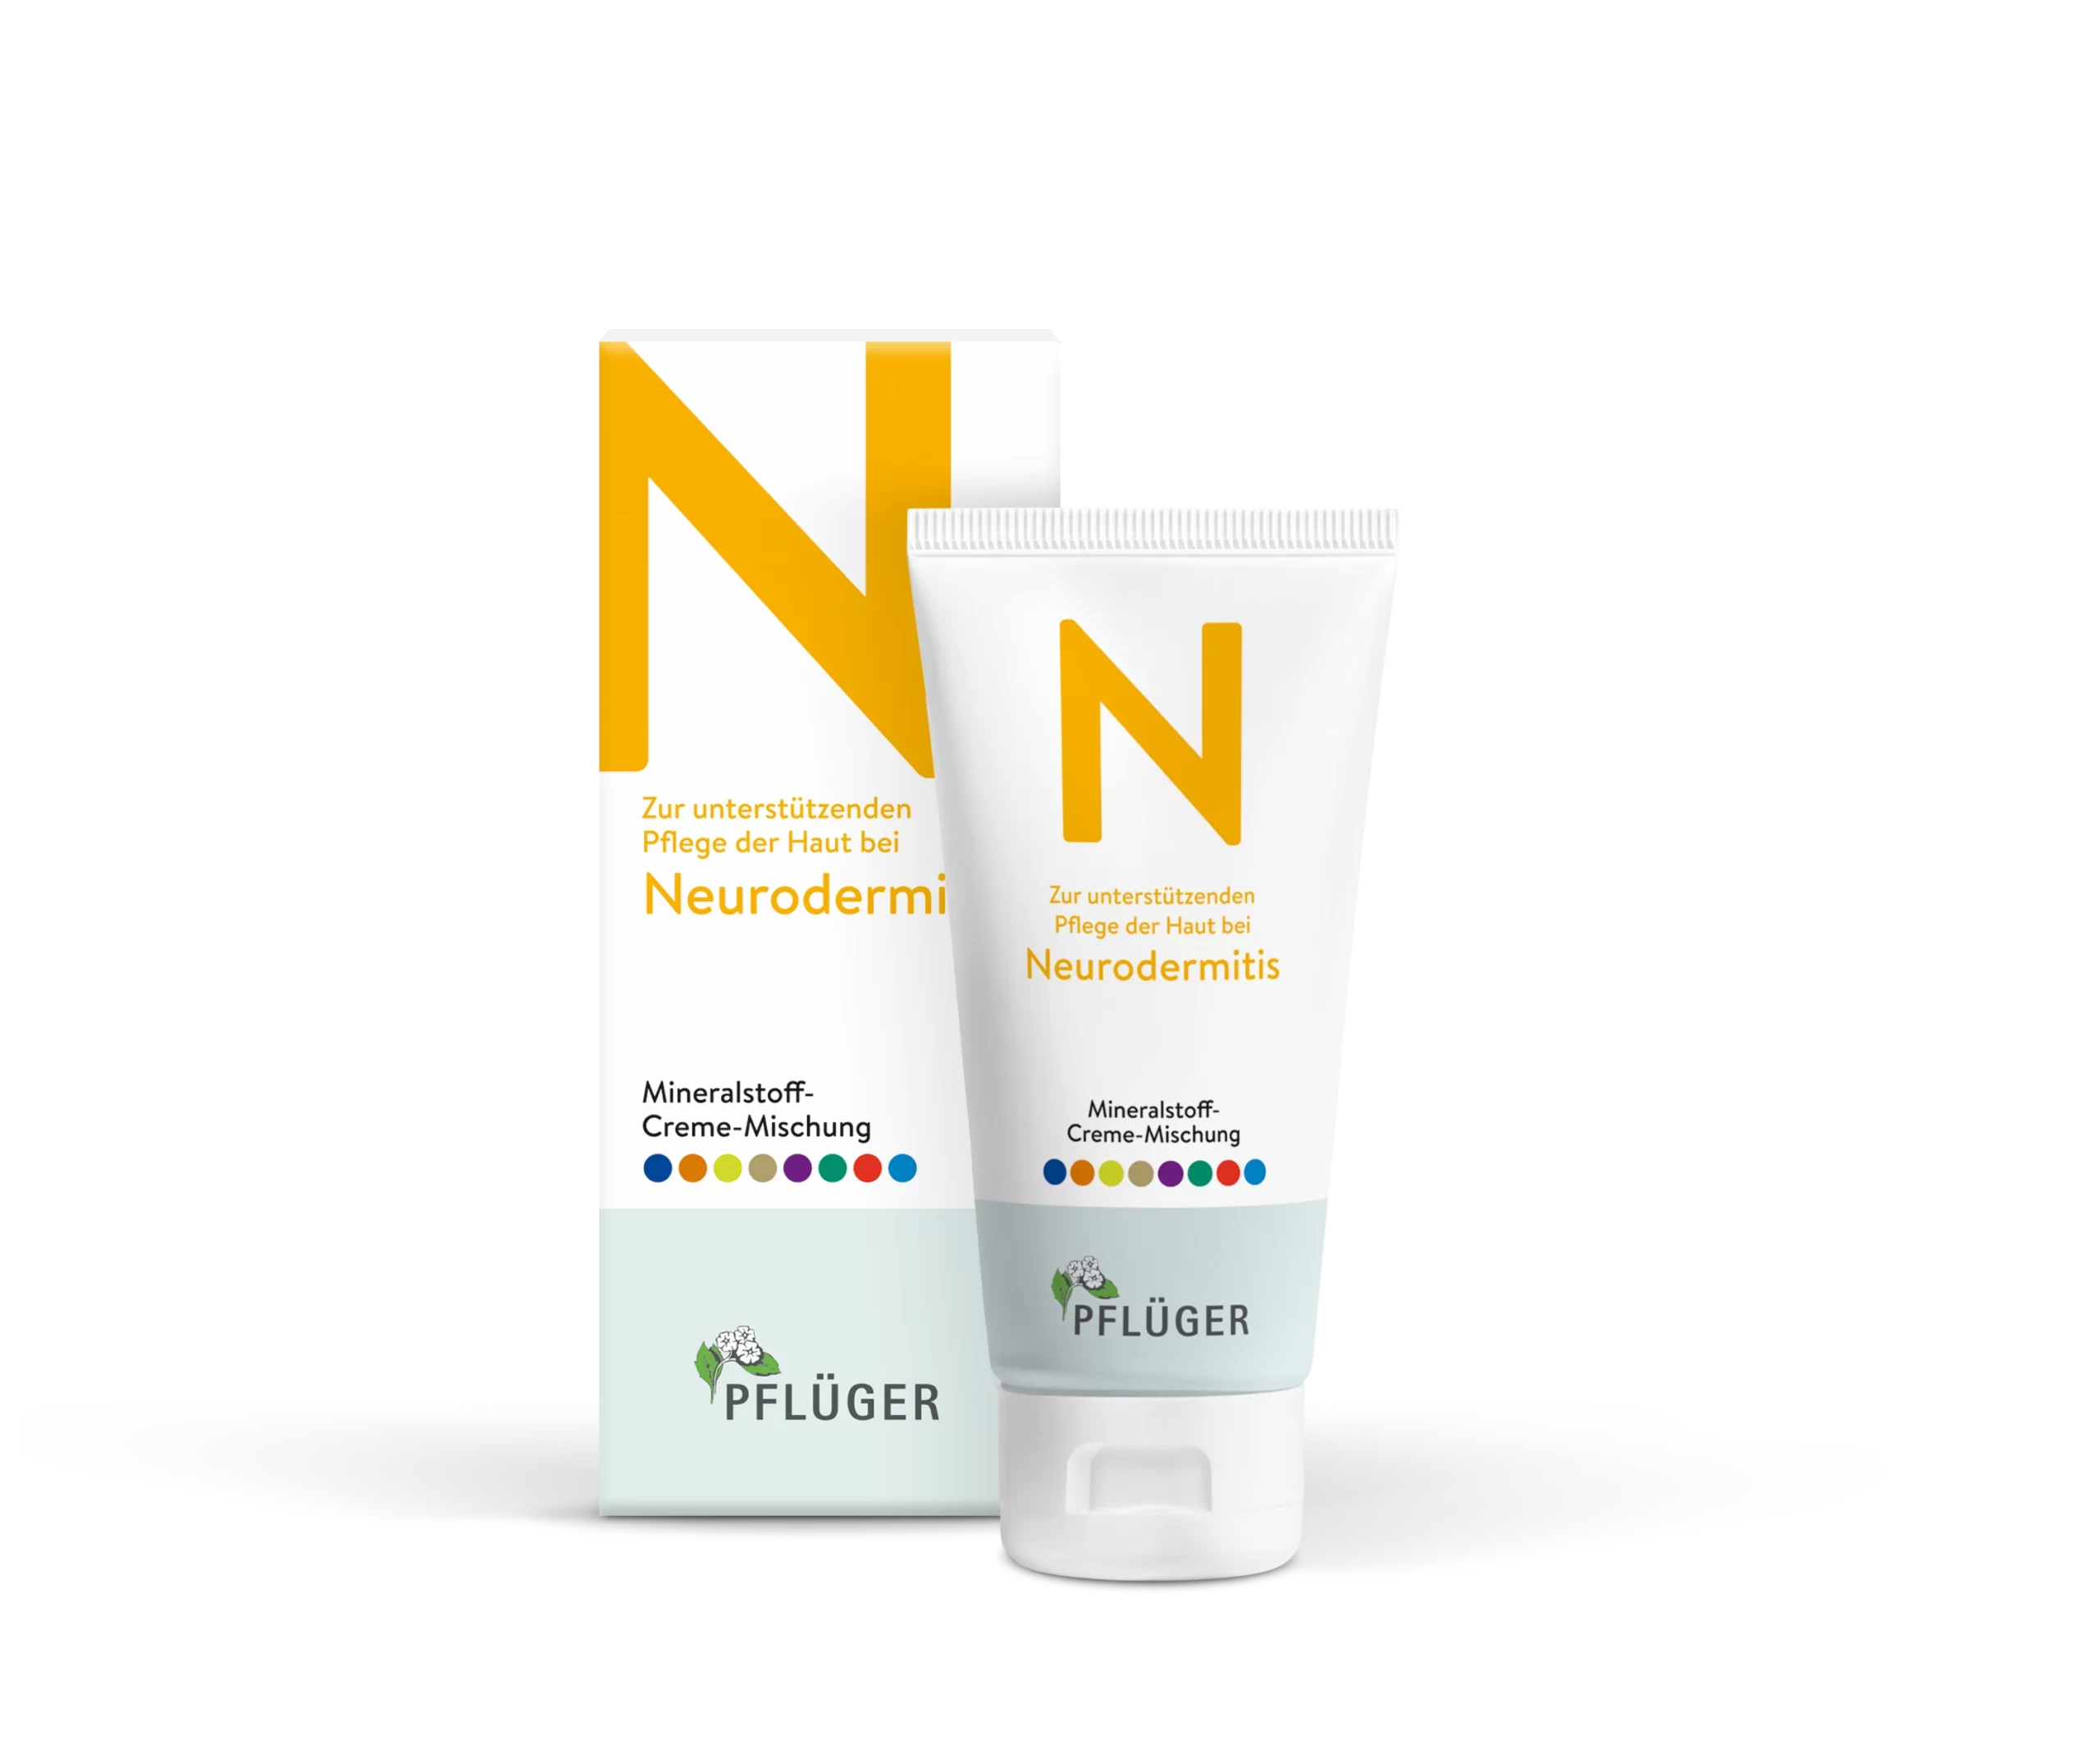 Mineral-Cream-Blend N, For the Supportive Care of Neurodermatitis